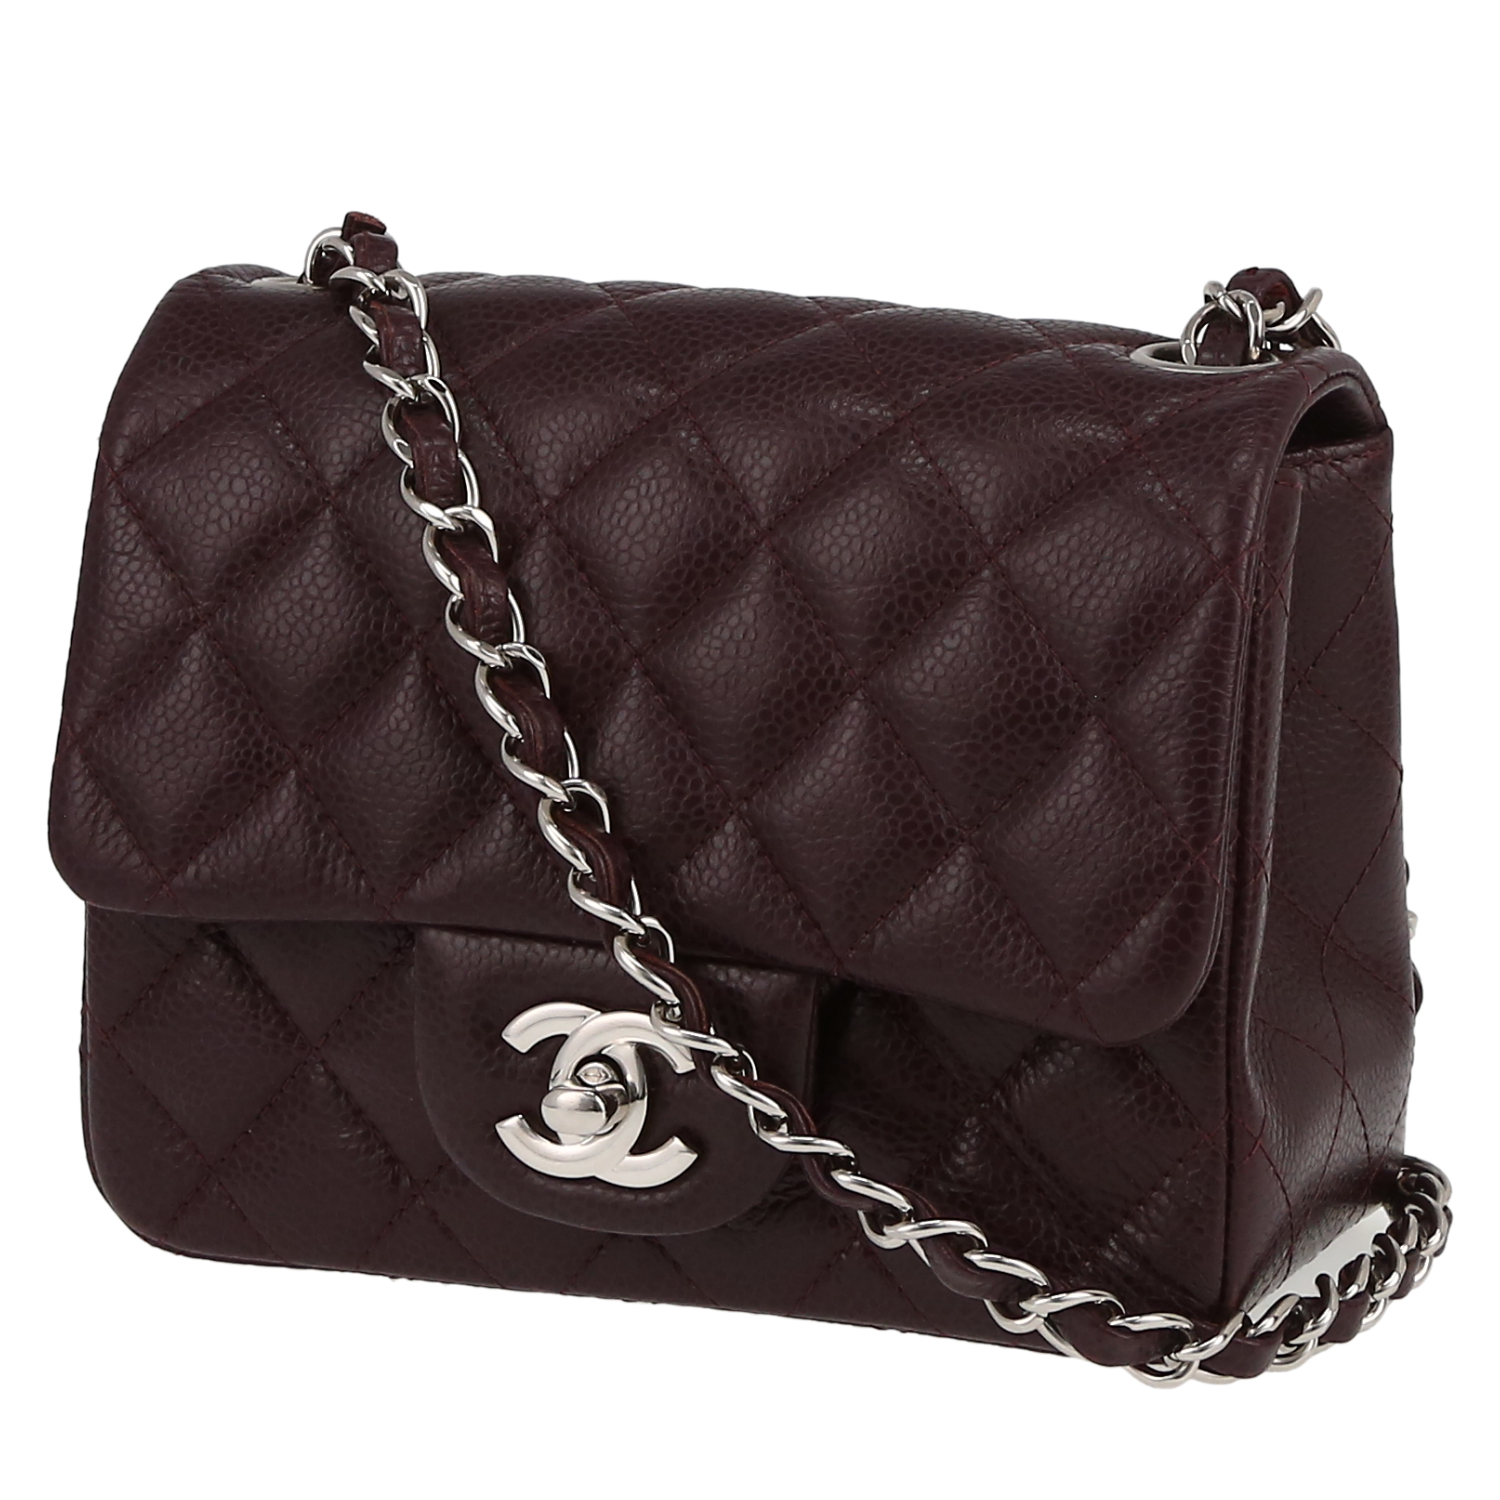 Chanel Mini Timeless Shoulder Bag in Burgundy Quilted Grained